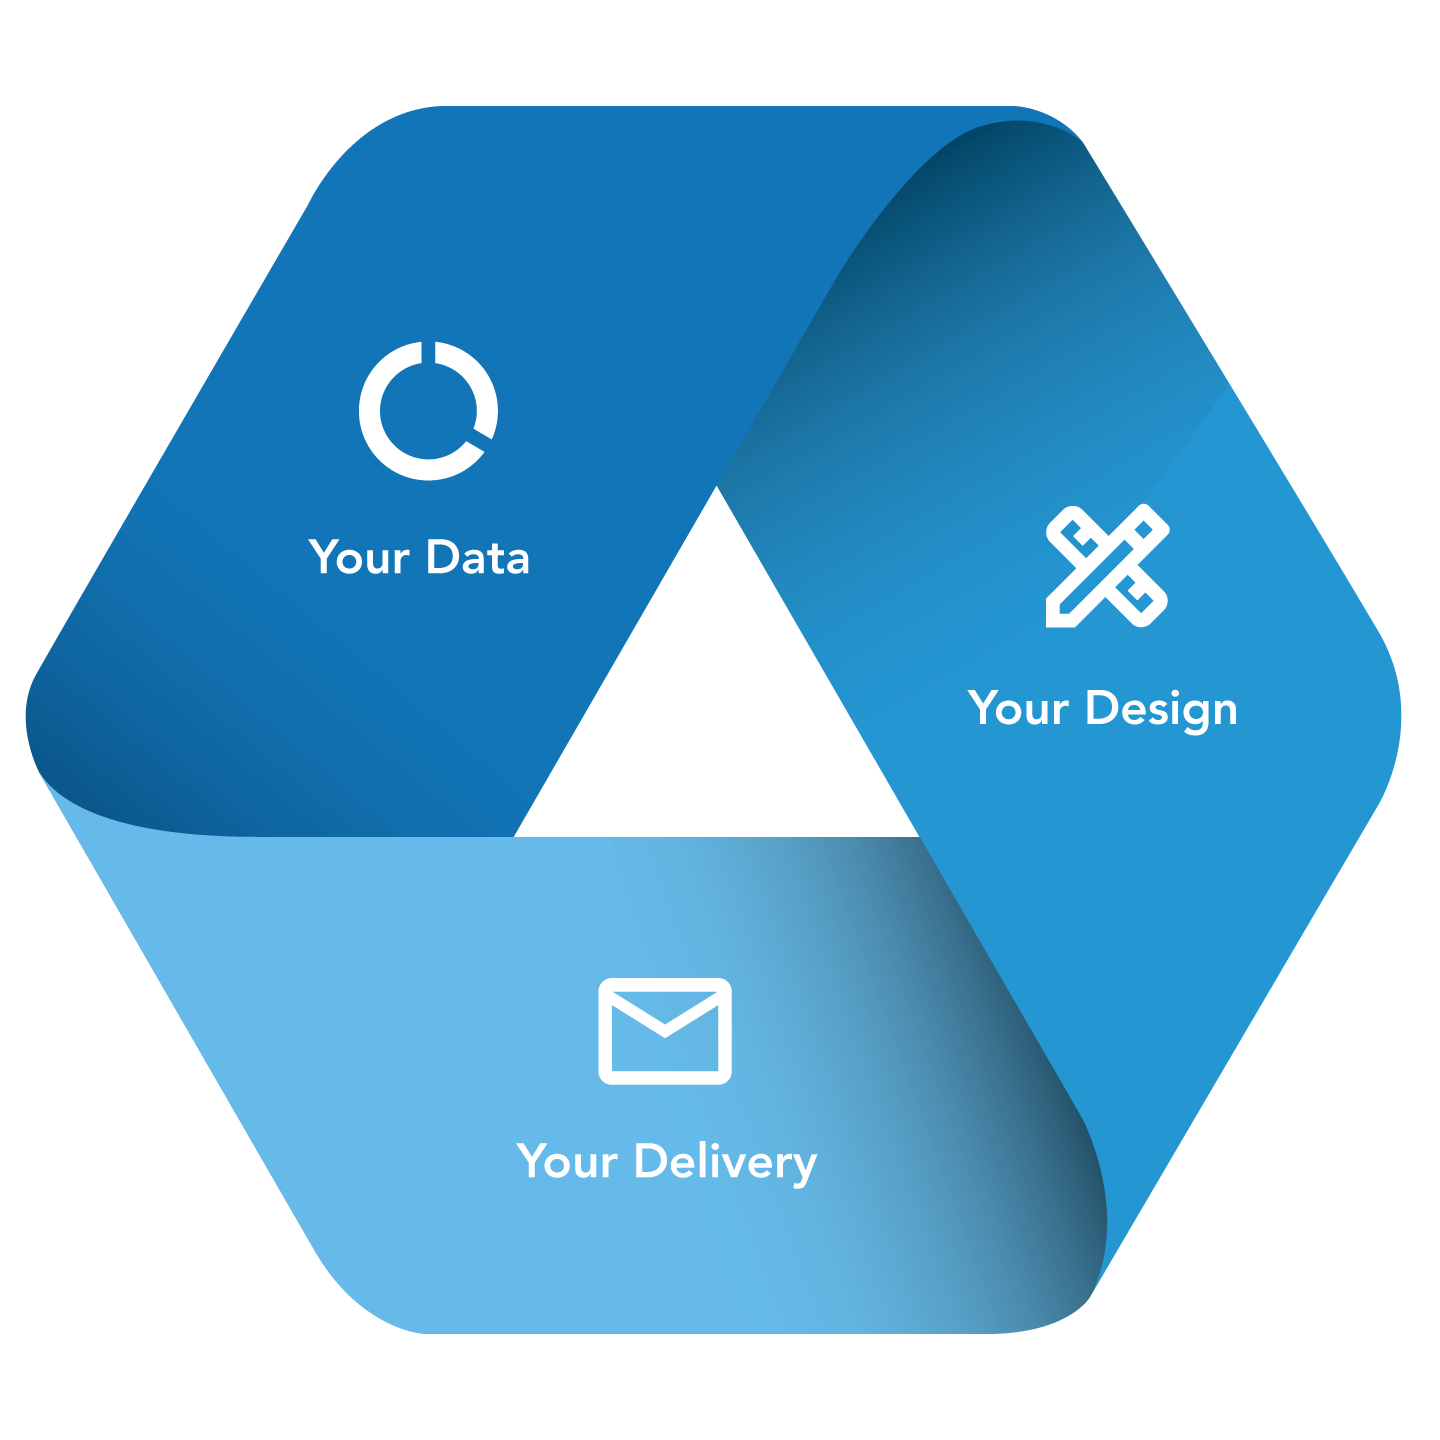 Your data, Your design and your delivery